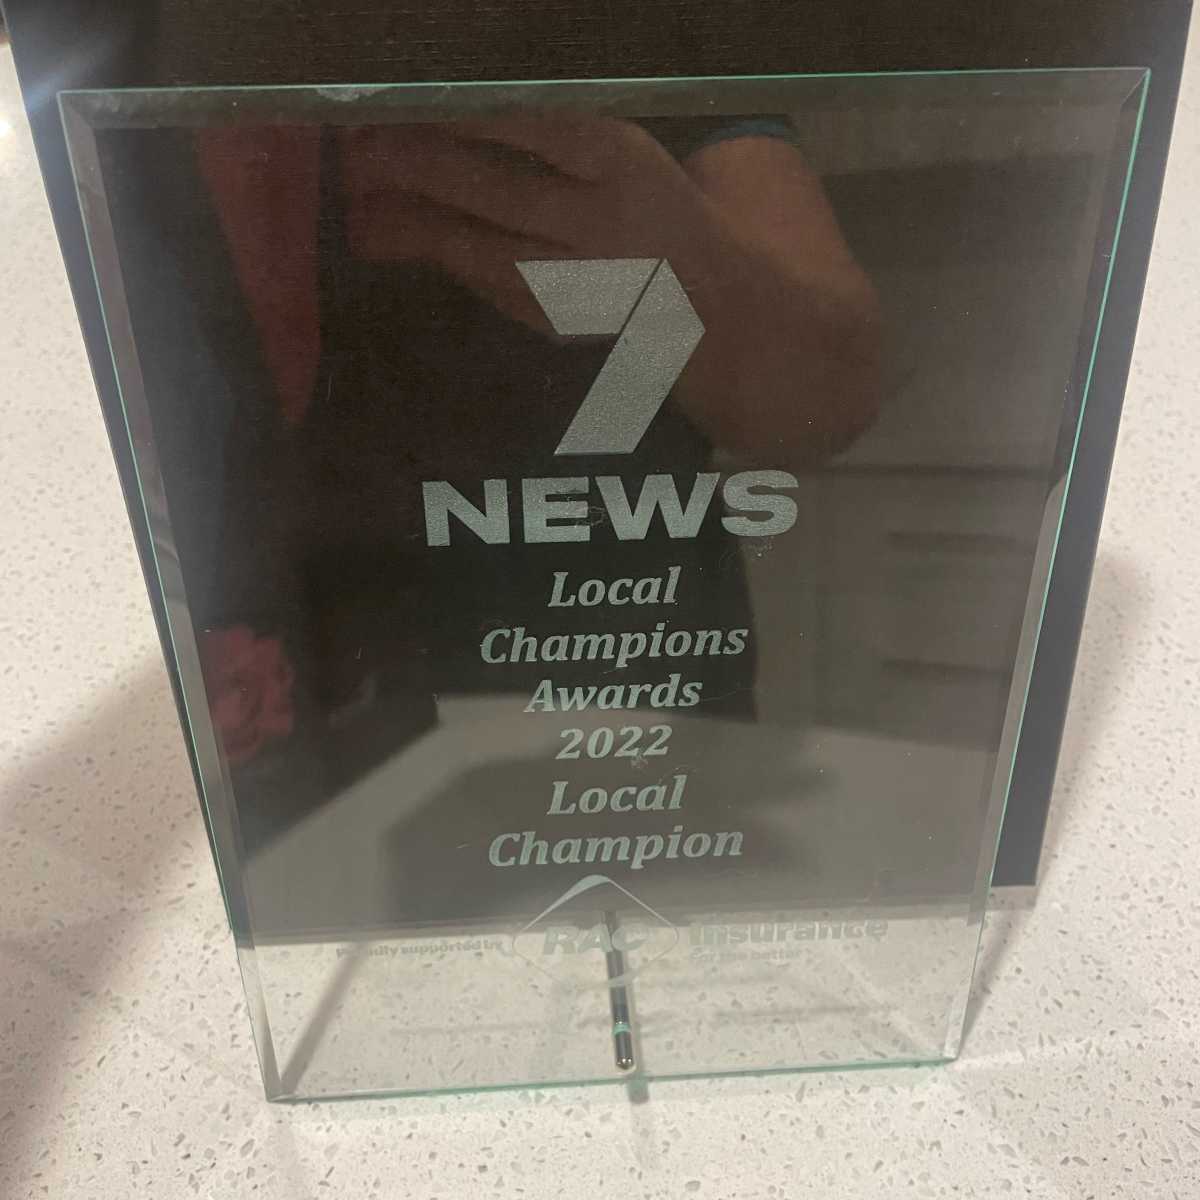 Close up of the award which is made of clear glass with text engraved that reads: 7 News Local Champions Awards 2022 Local Champion.